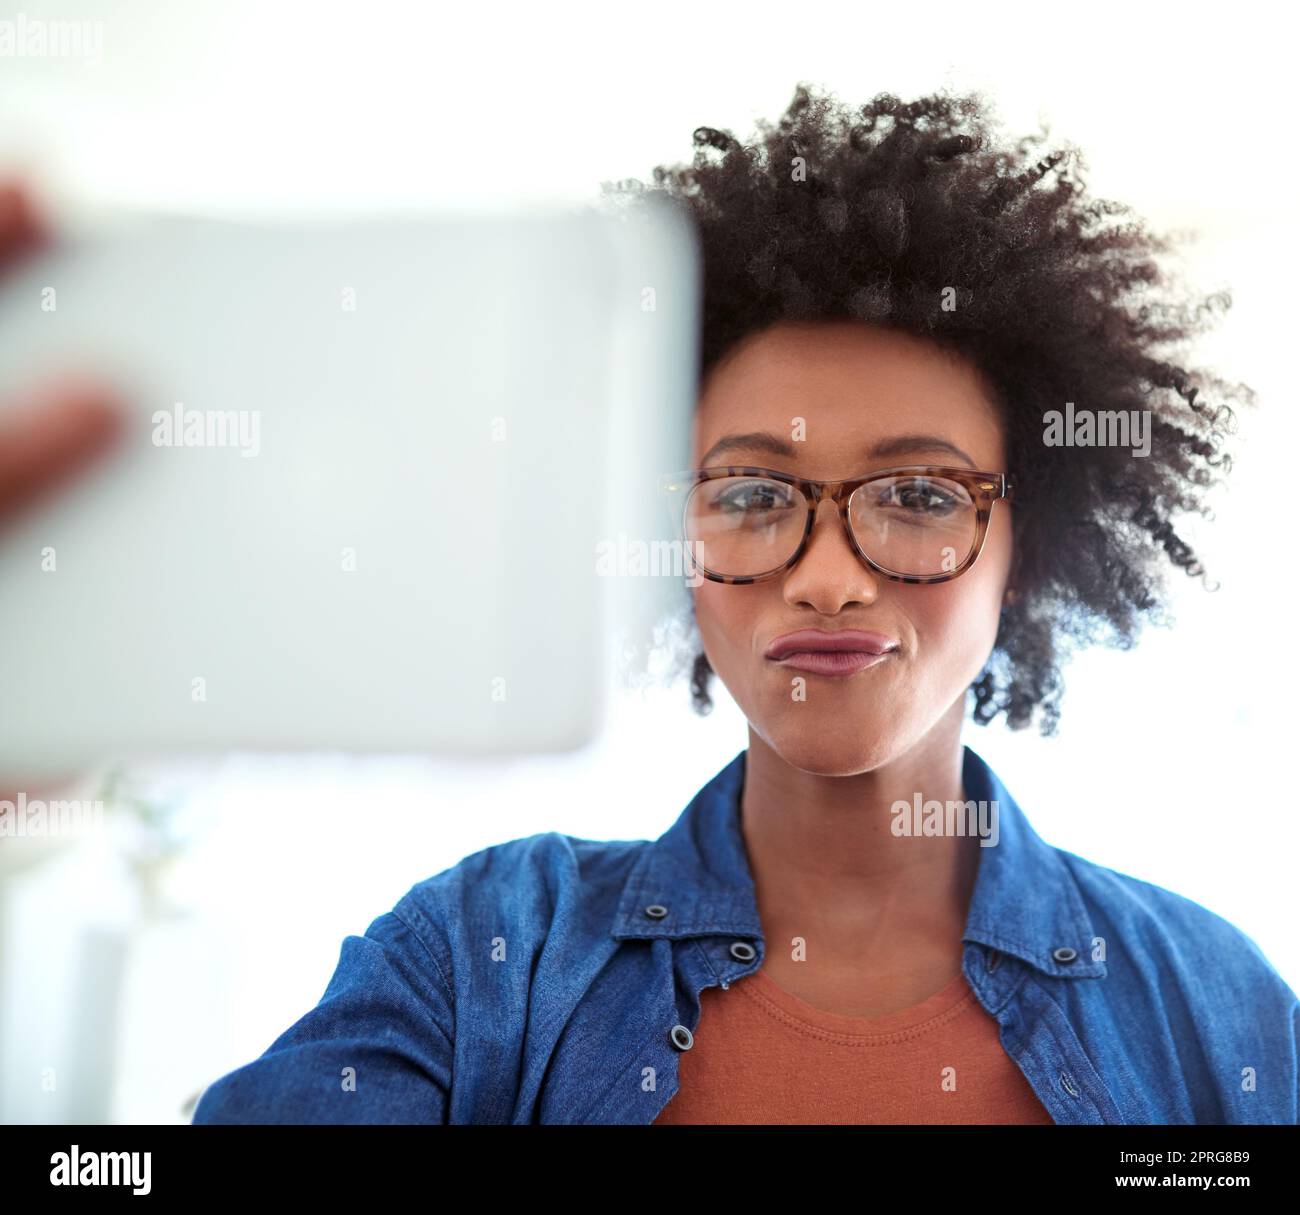 Time for a selfie. Portrait of an attractive young woman taking a selfie at home. Stock Photo